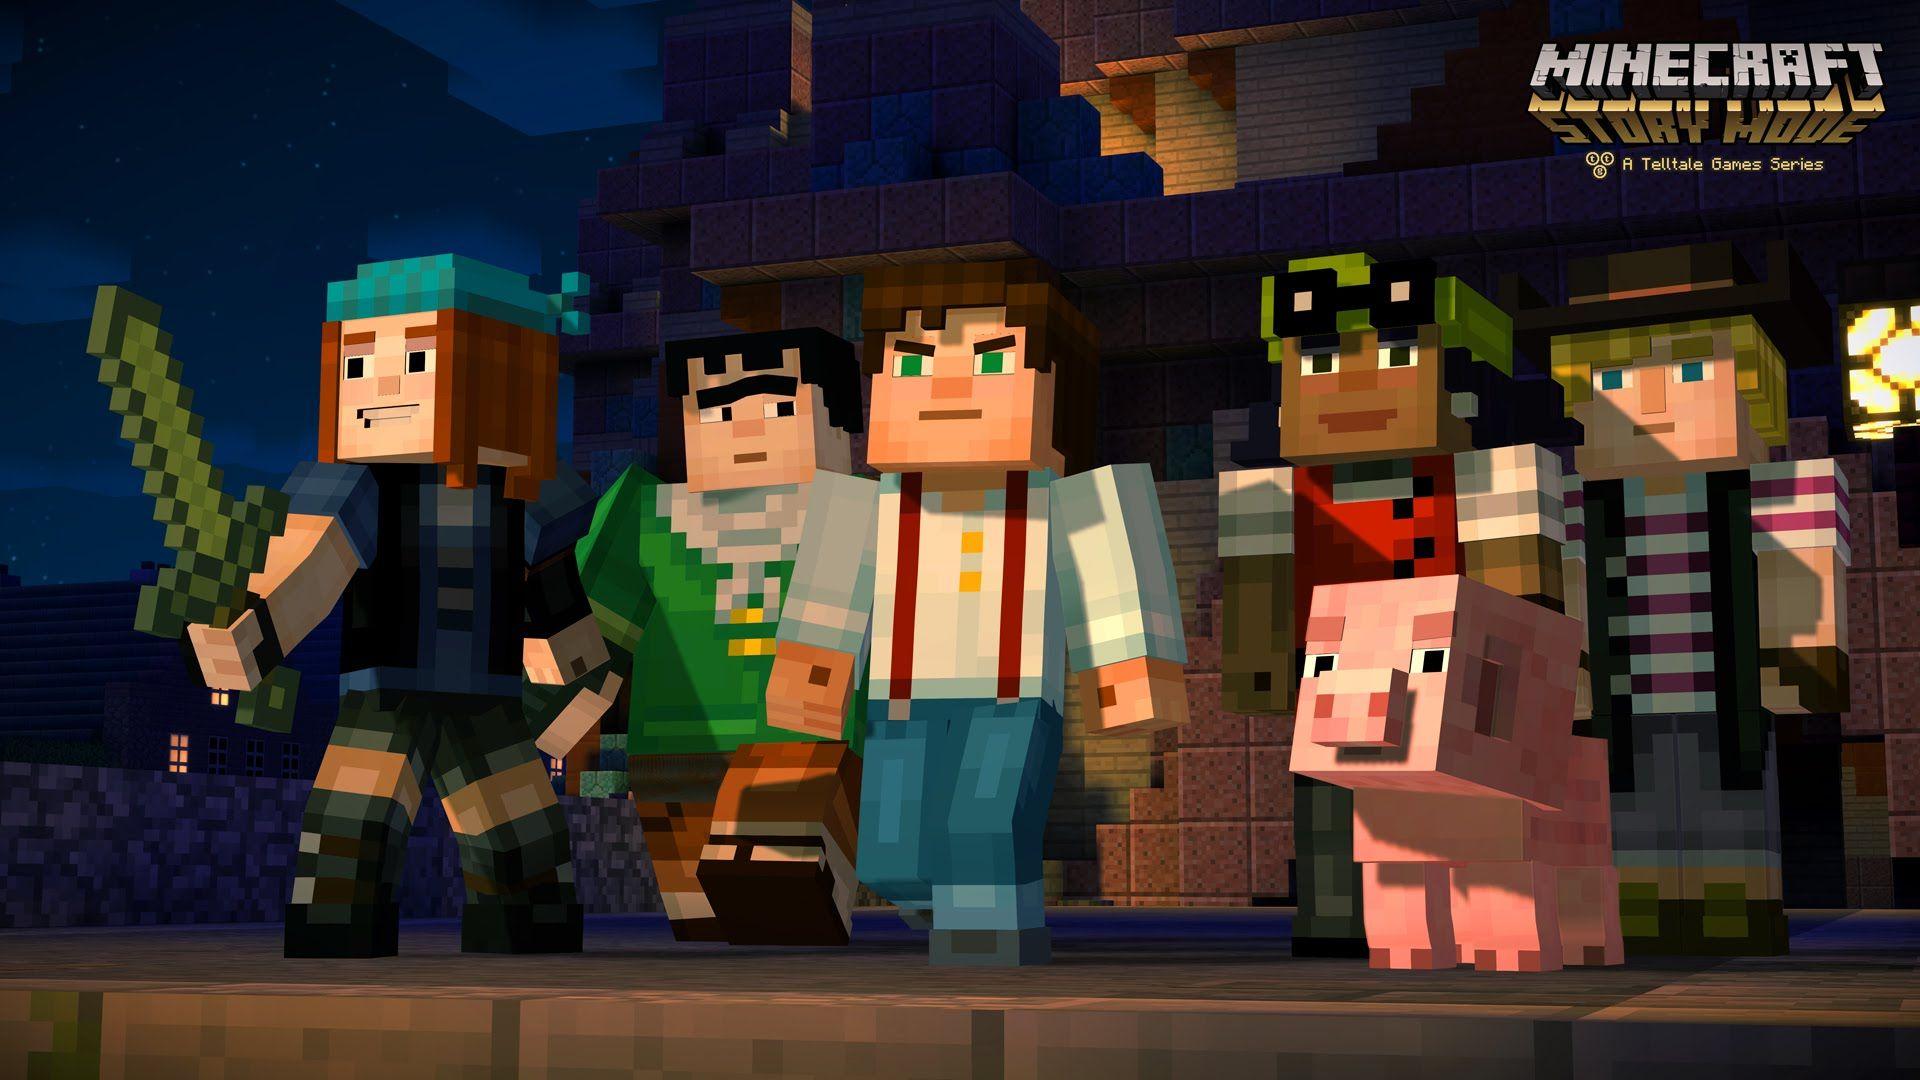 Minecraft: Story Mode HD wallpaper free download